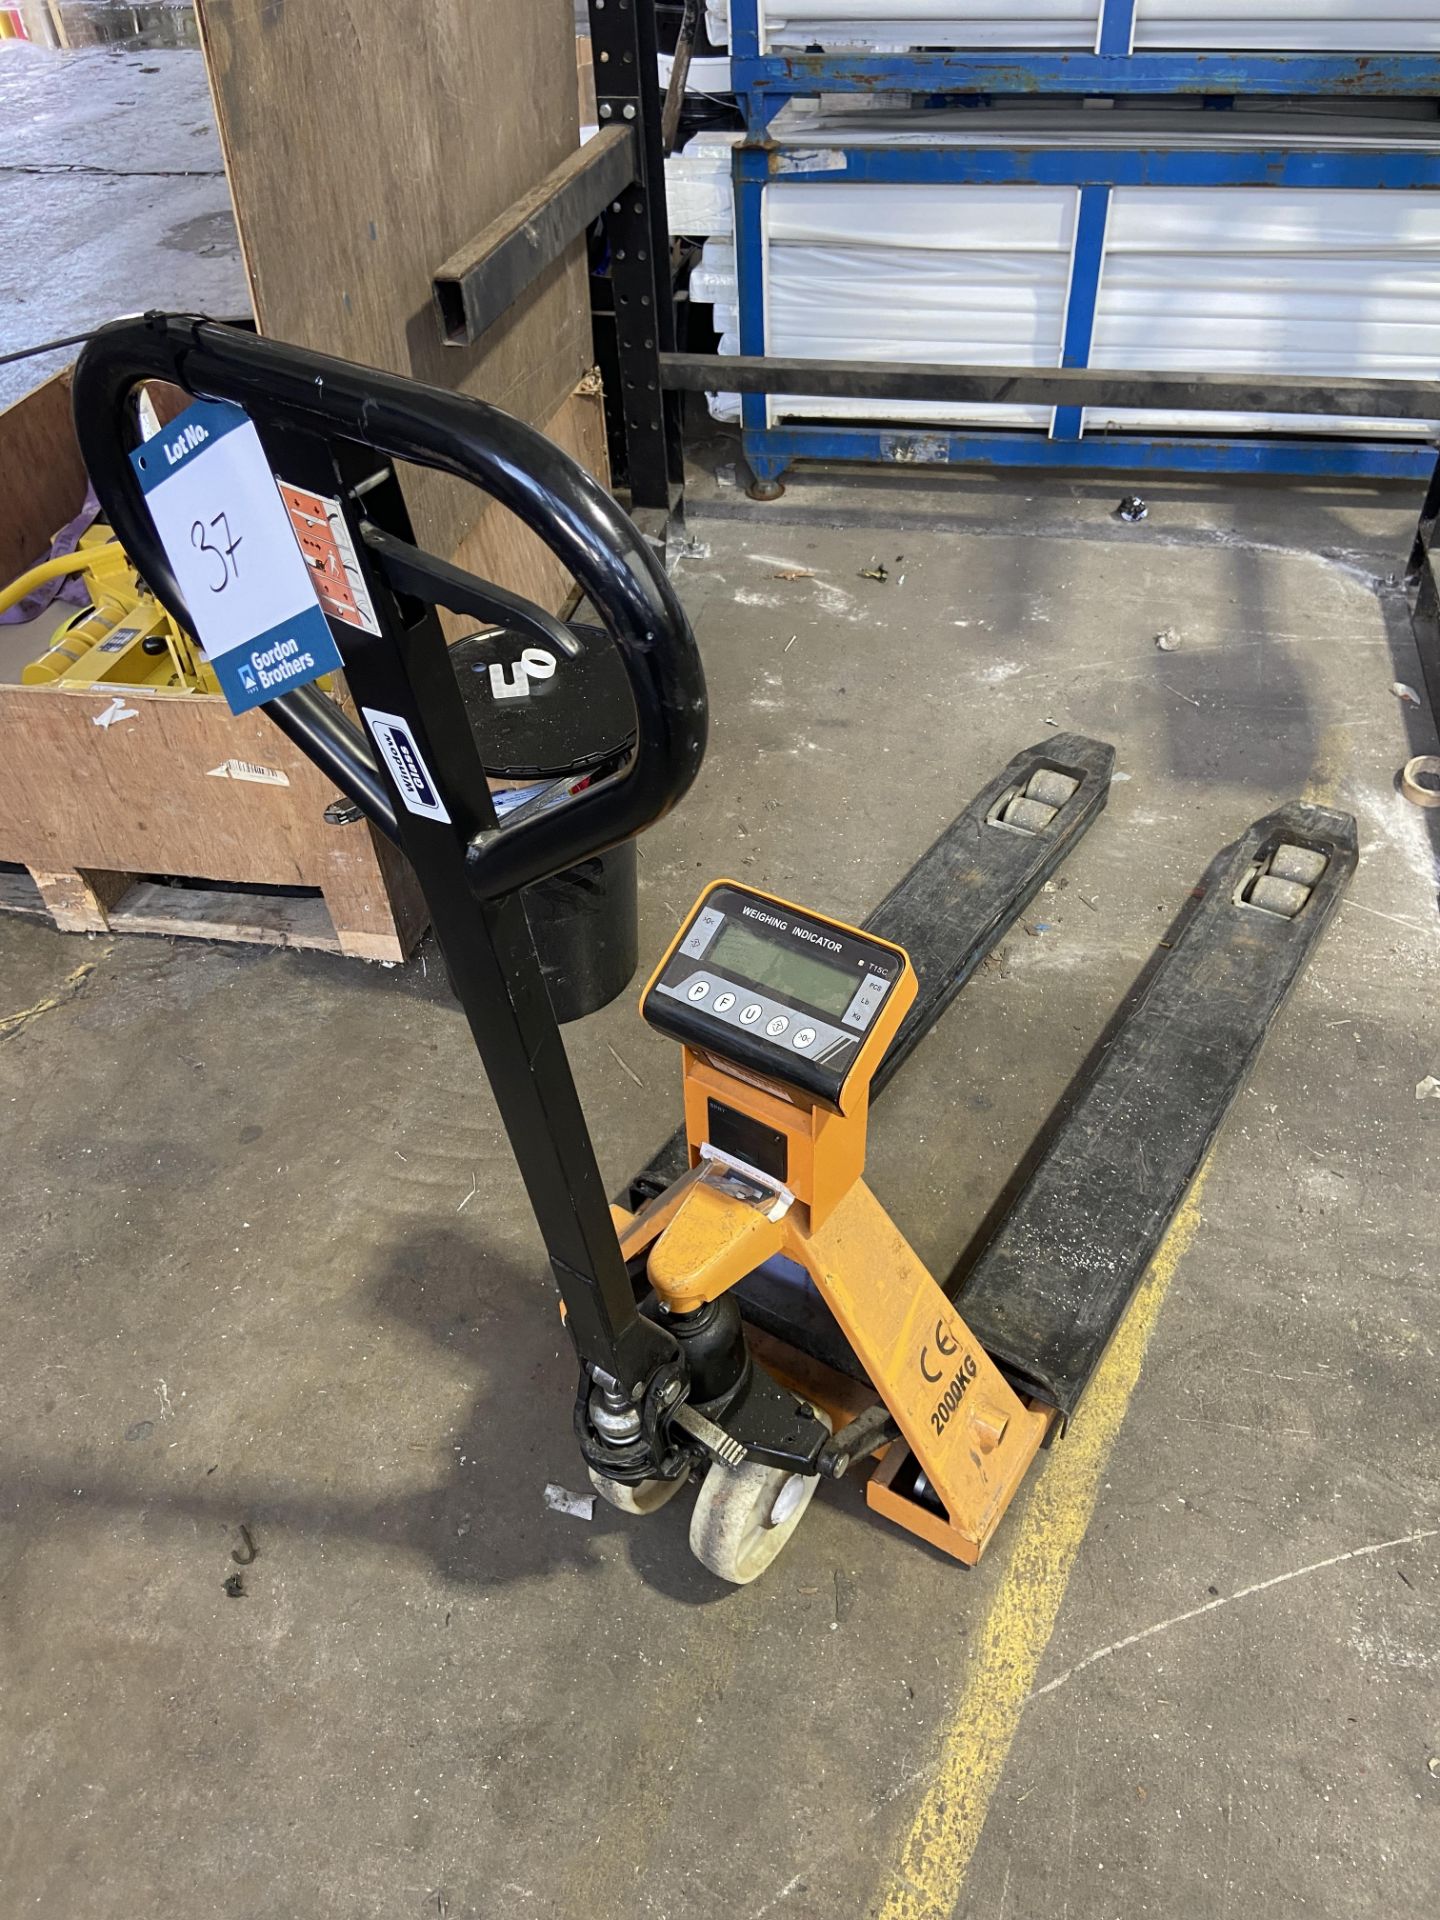 Hydraulic pallet truck, 2,000kgs, with T15 weighing indicator